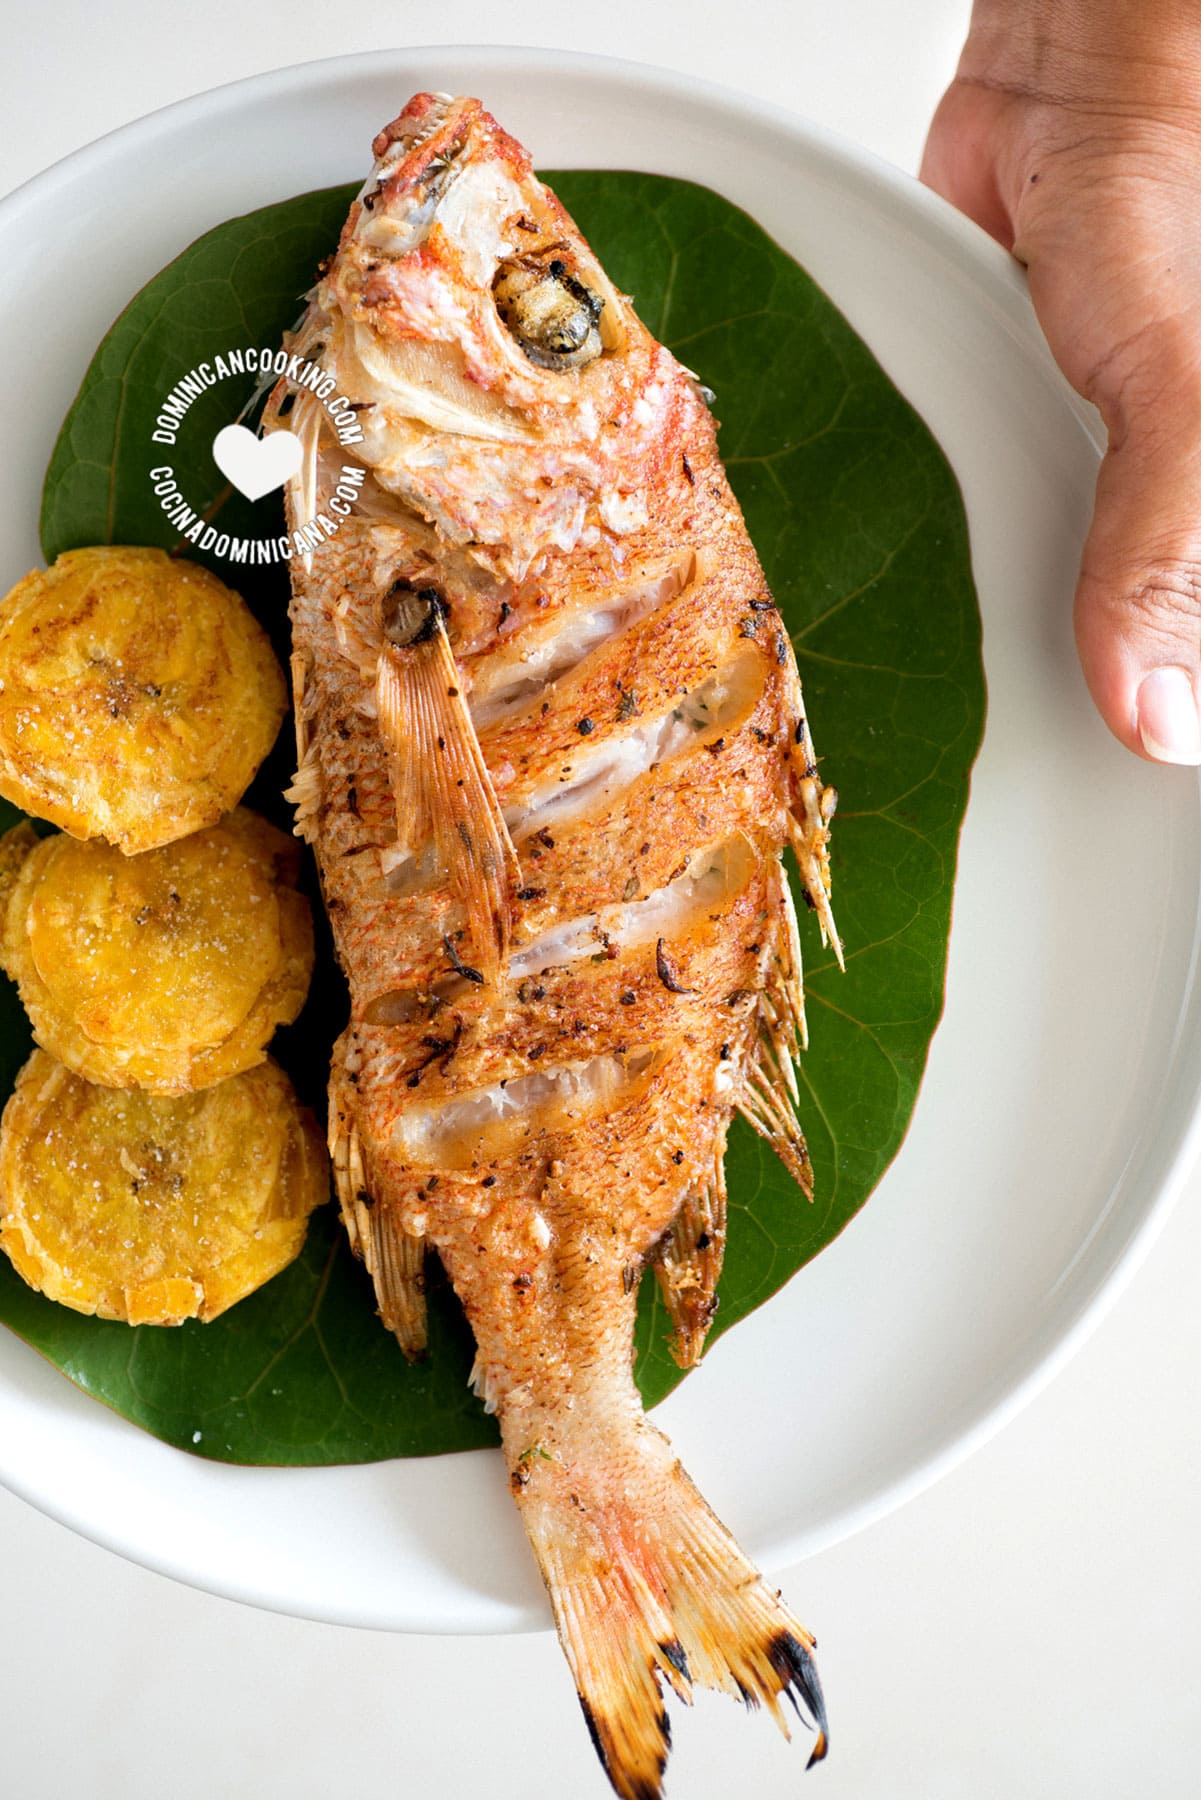 Pescado frito (fried fish) on plate held by hand